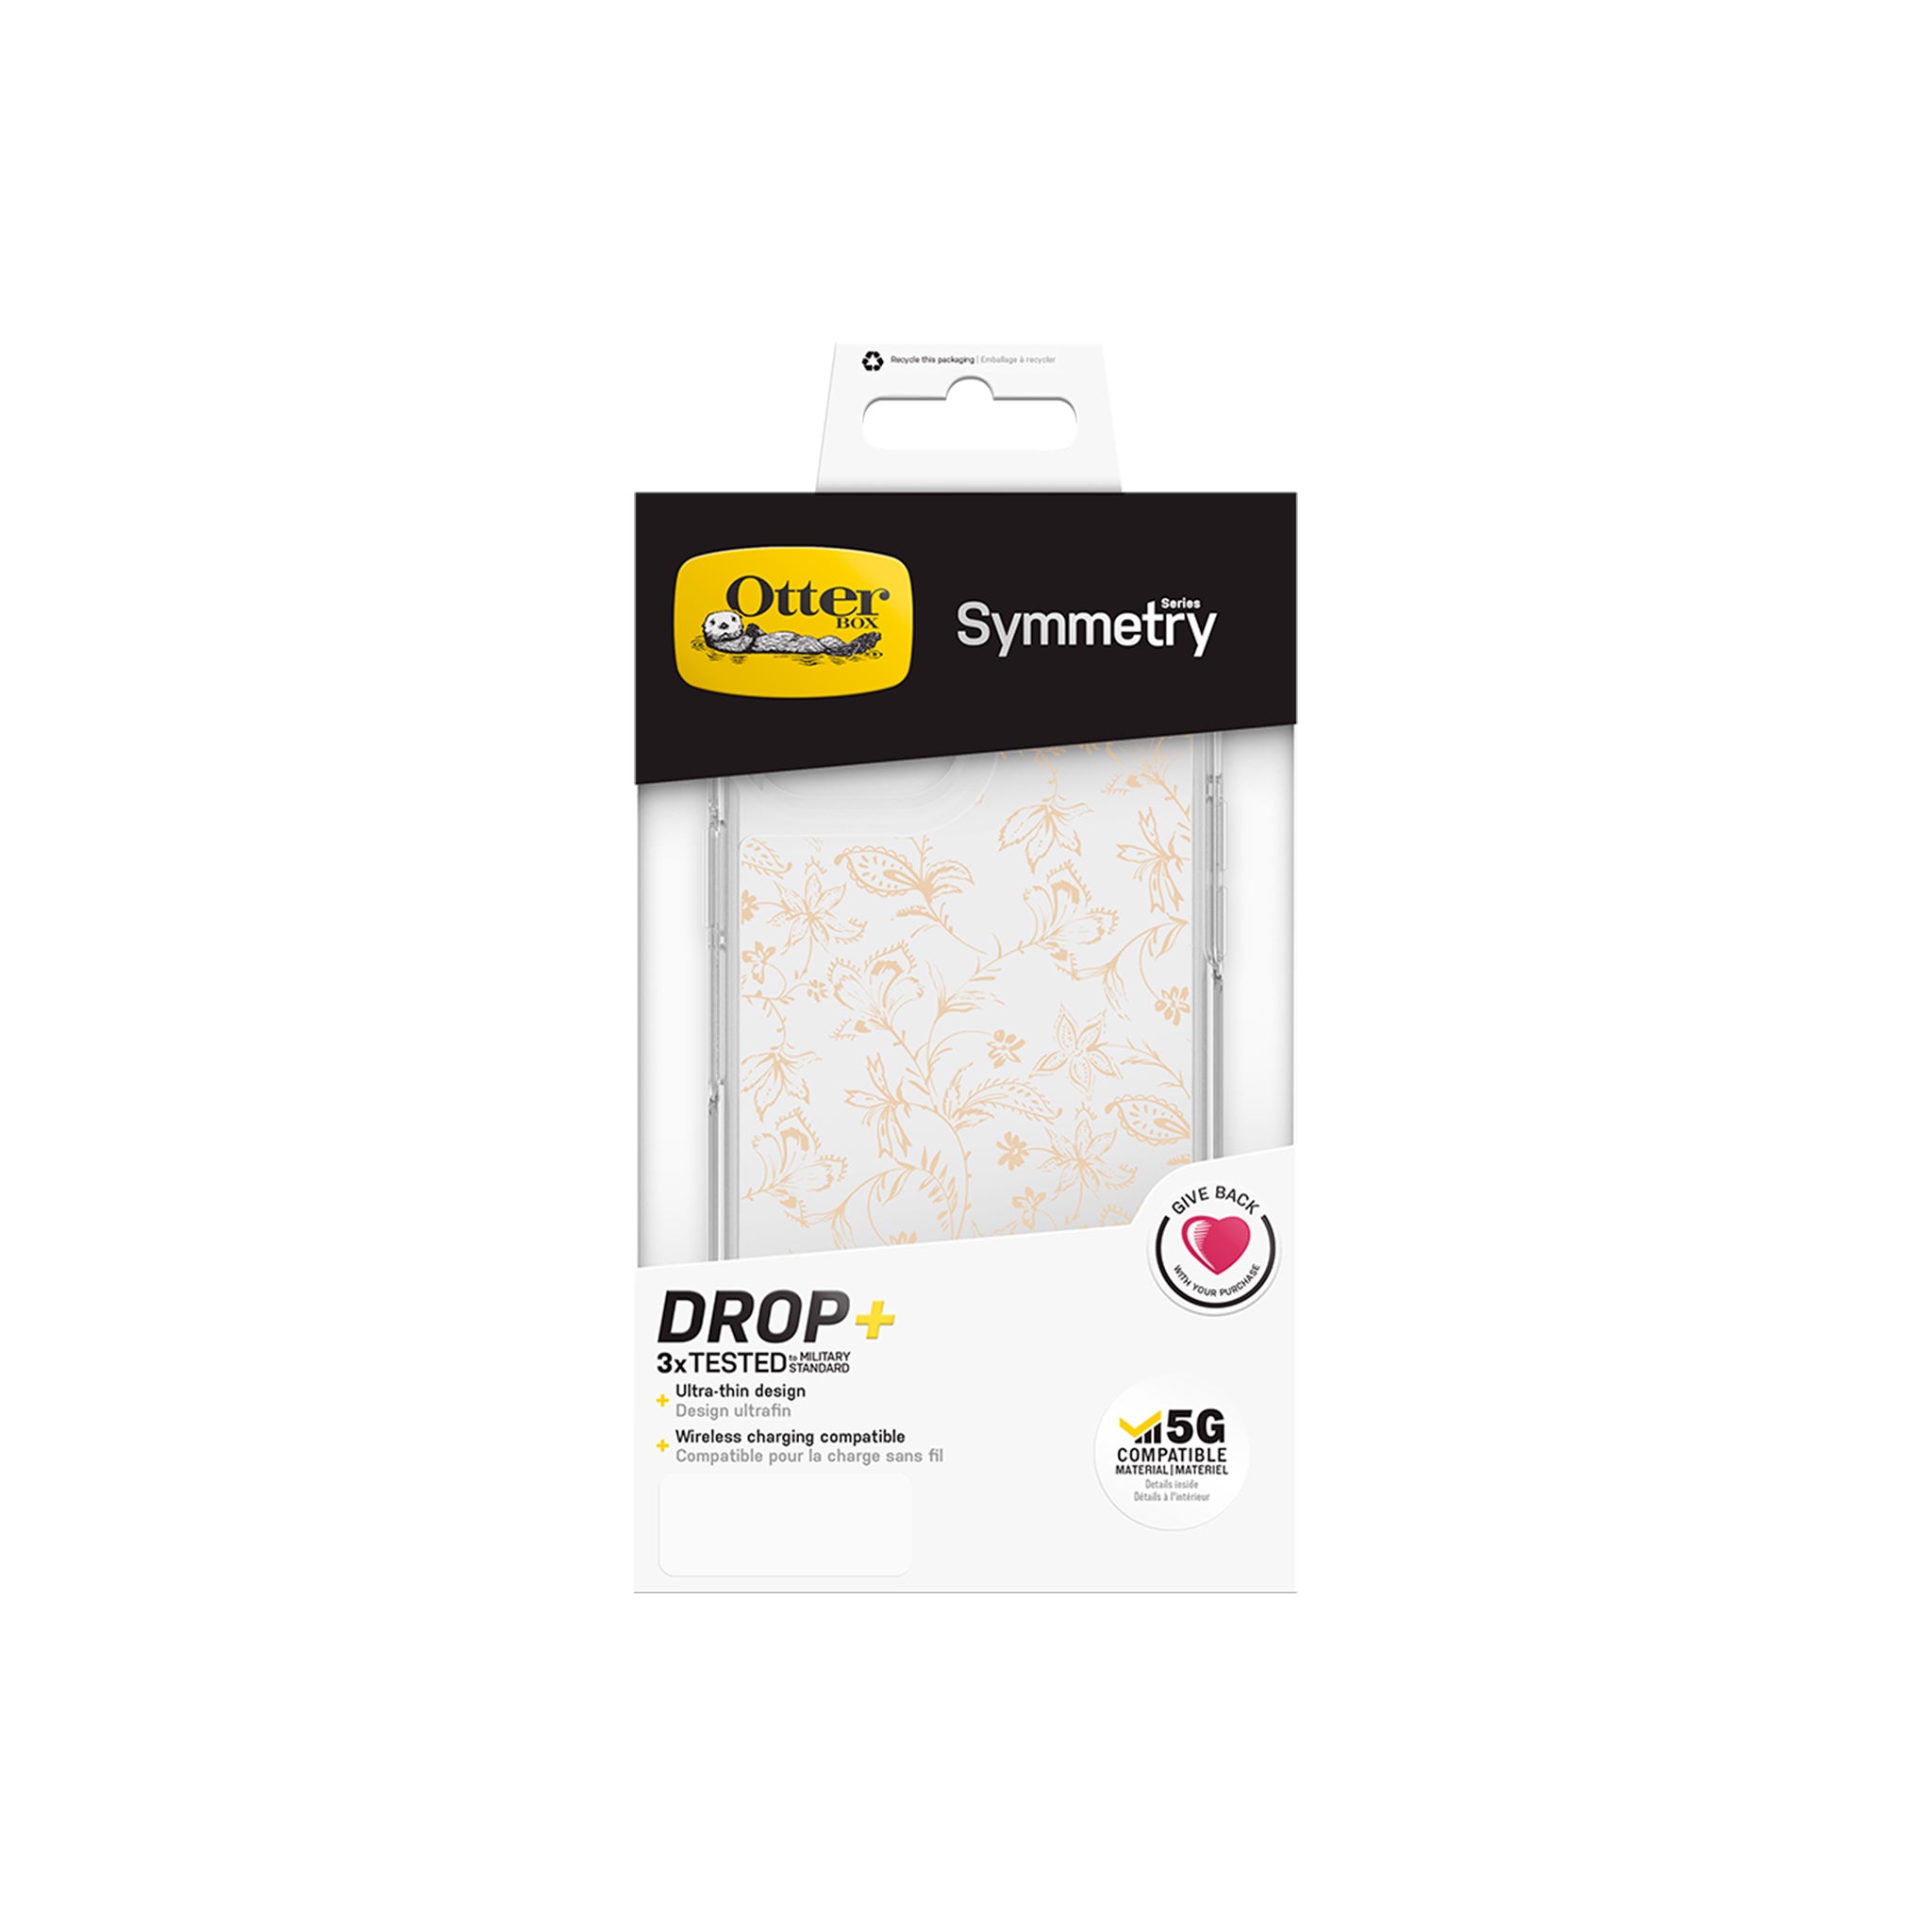 OtterBox - Symmetry Clear for Iphone 12 Pro Max - WALLFLOWER